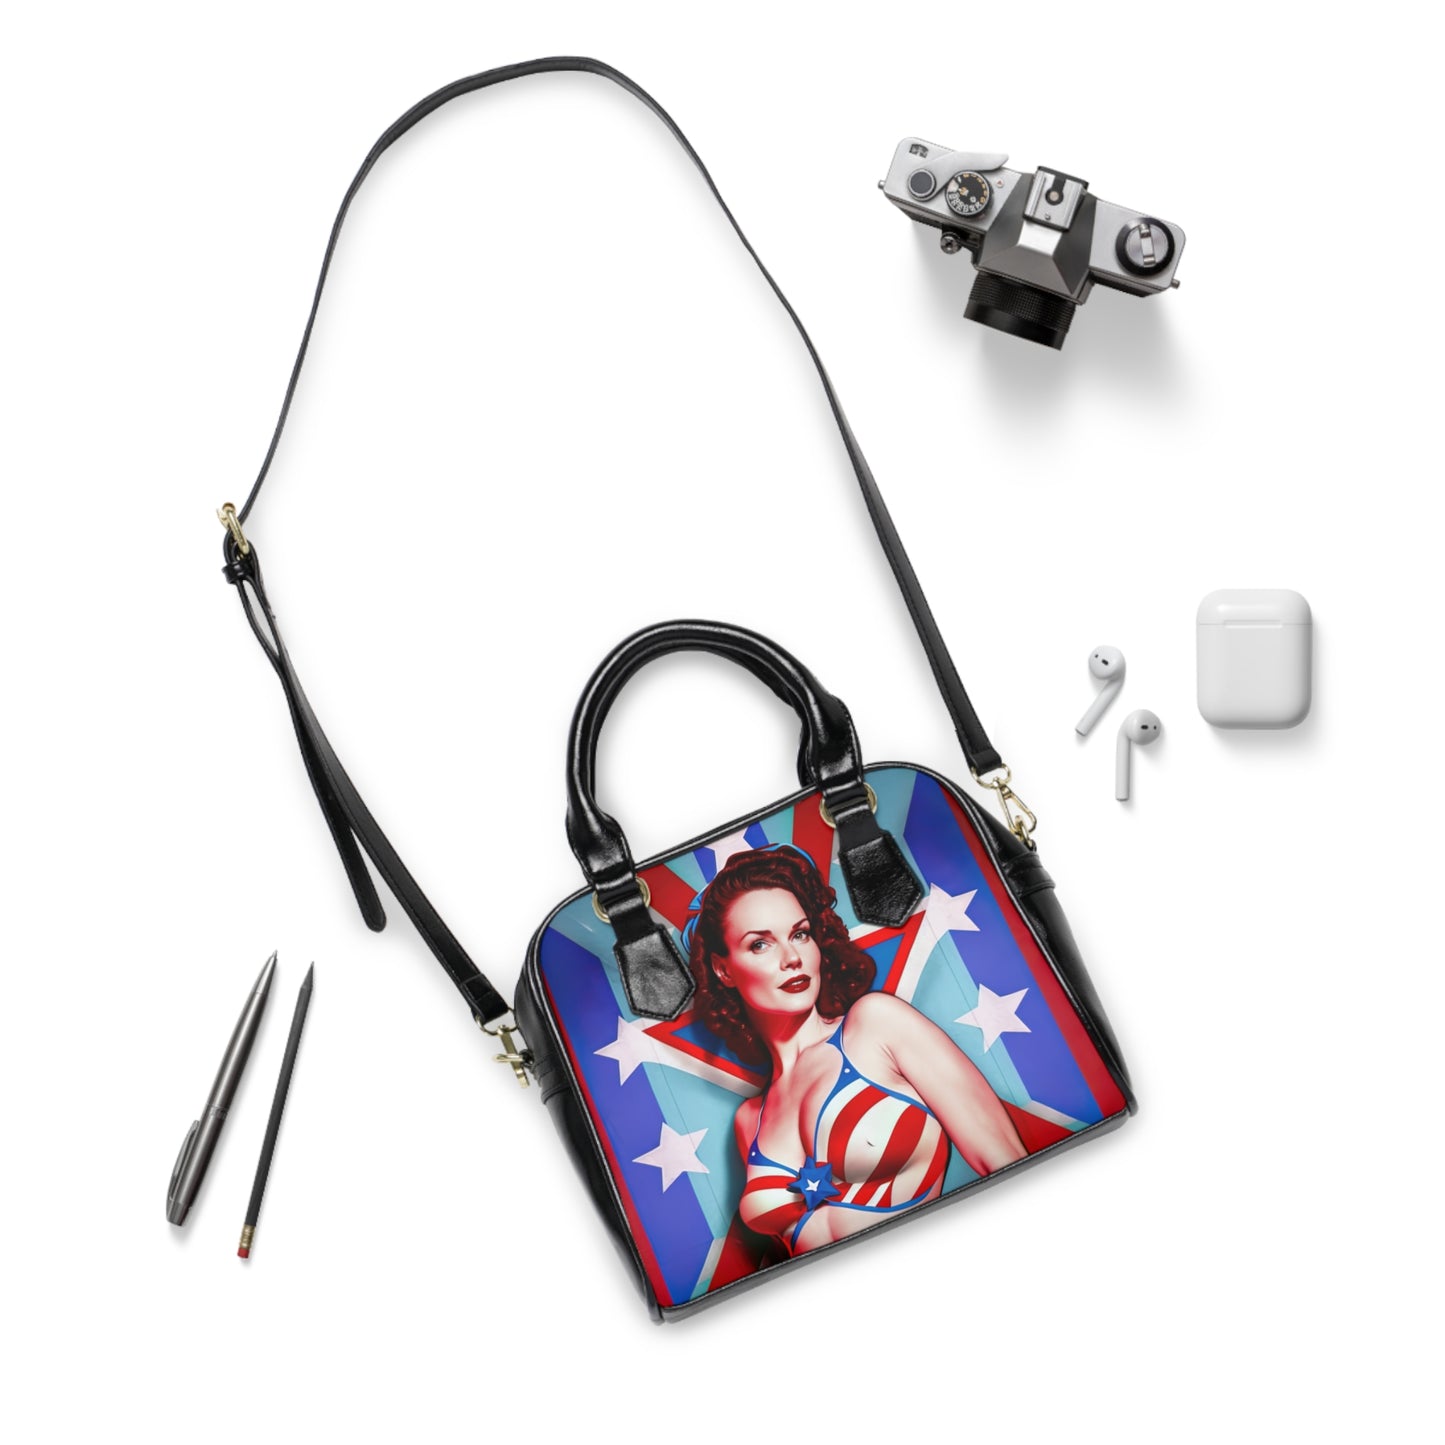 Retro Pin-Up Girl With Tattoo's Style Five Shoulder Handbag